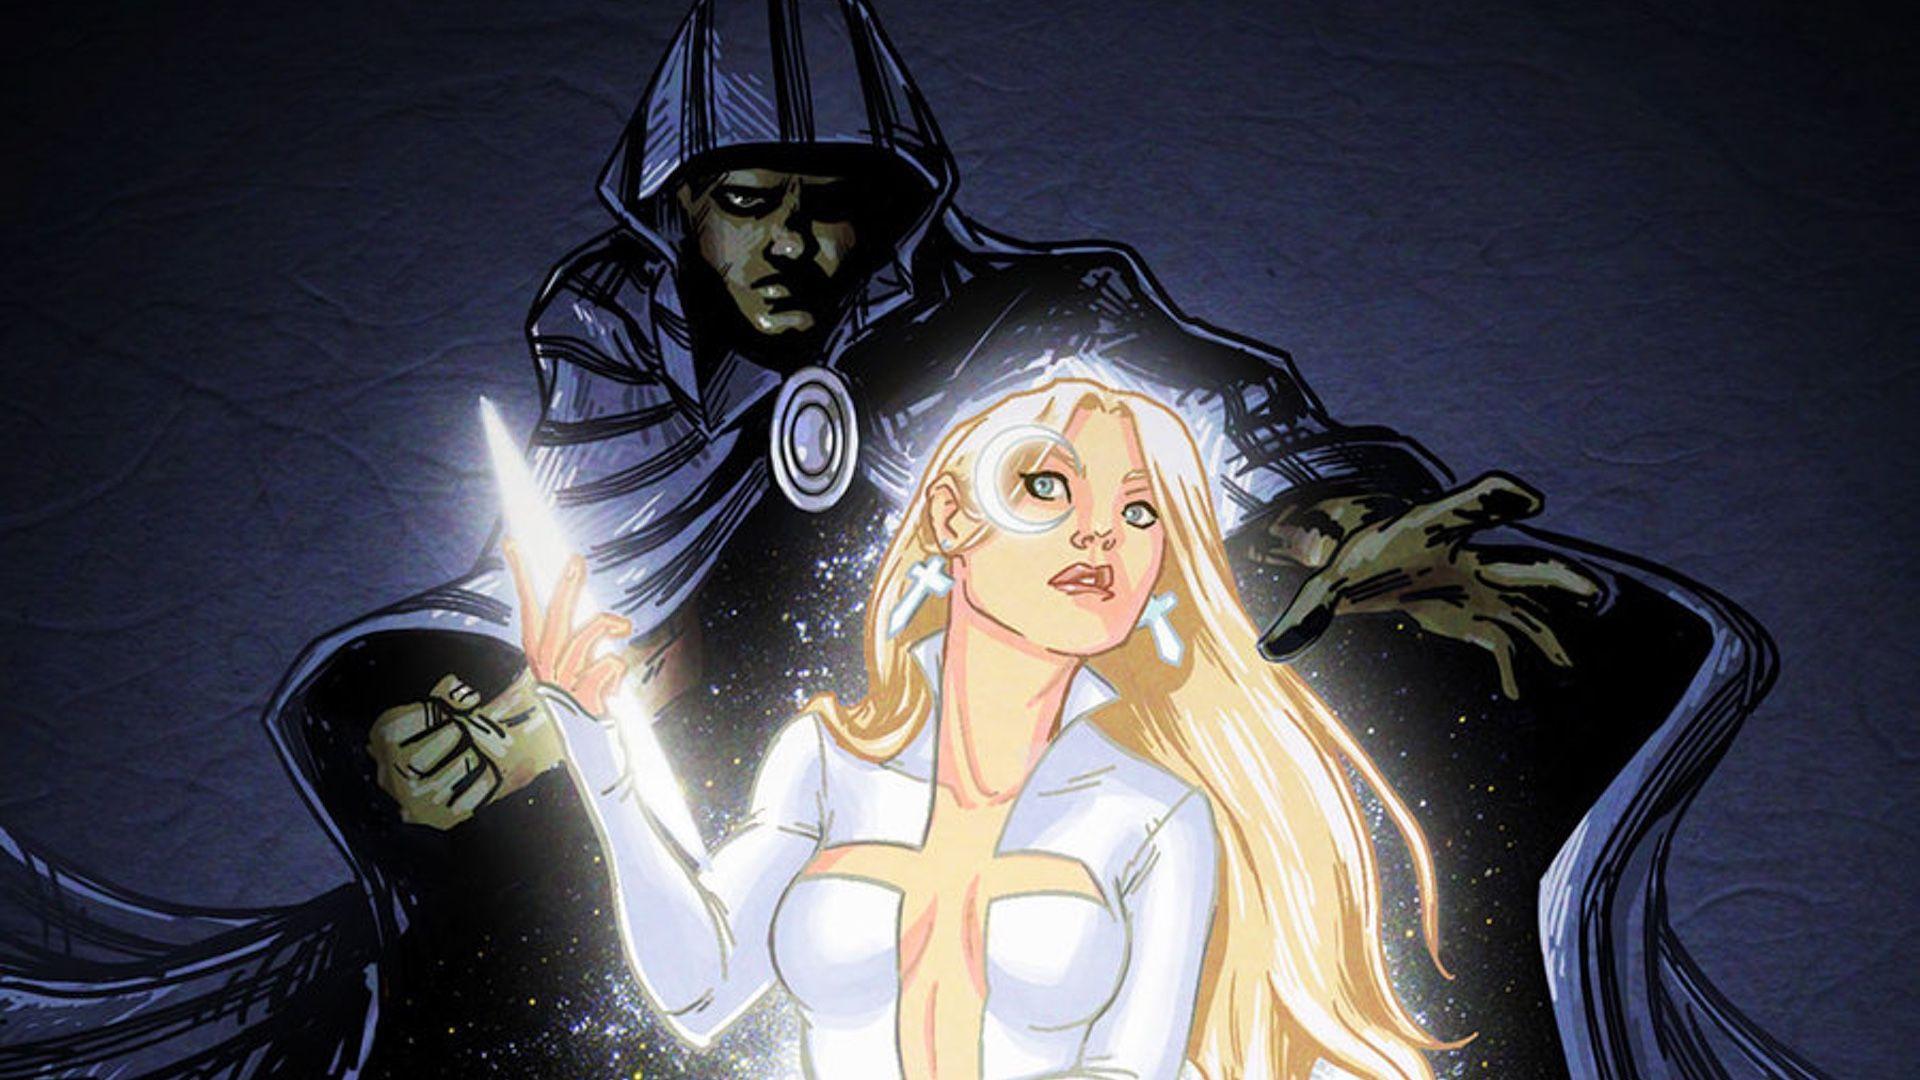 Marvel's CLOAK AND DAGGER Series Gets an Official Synopsis.